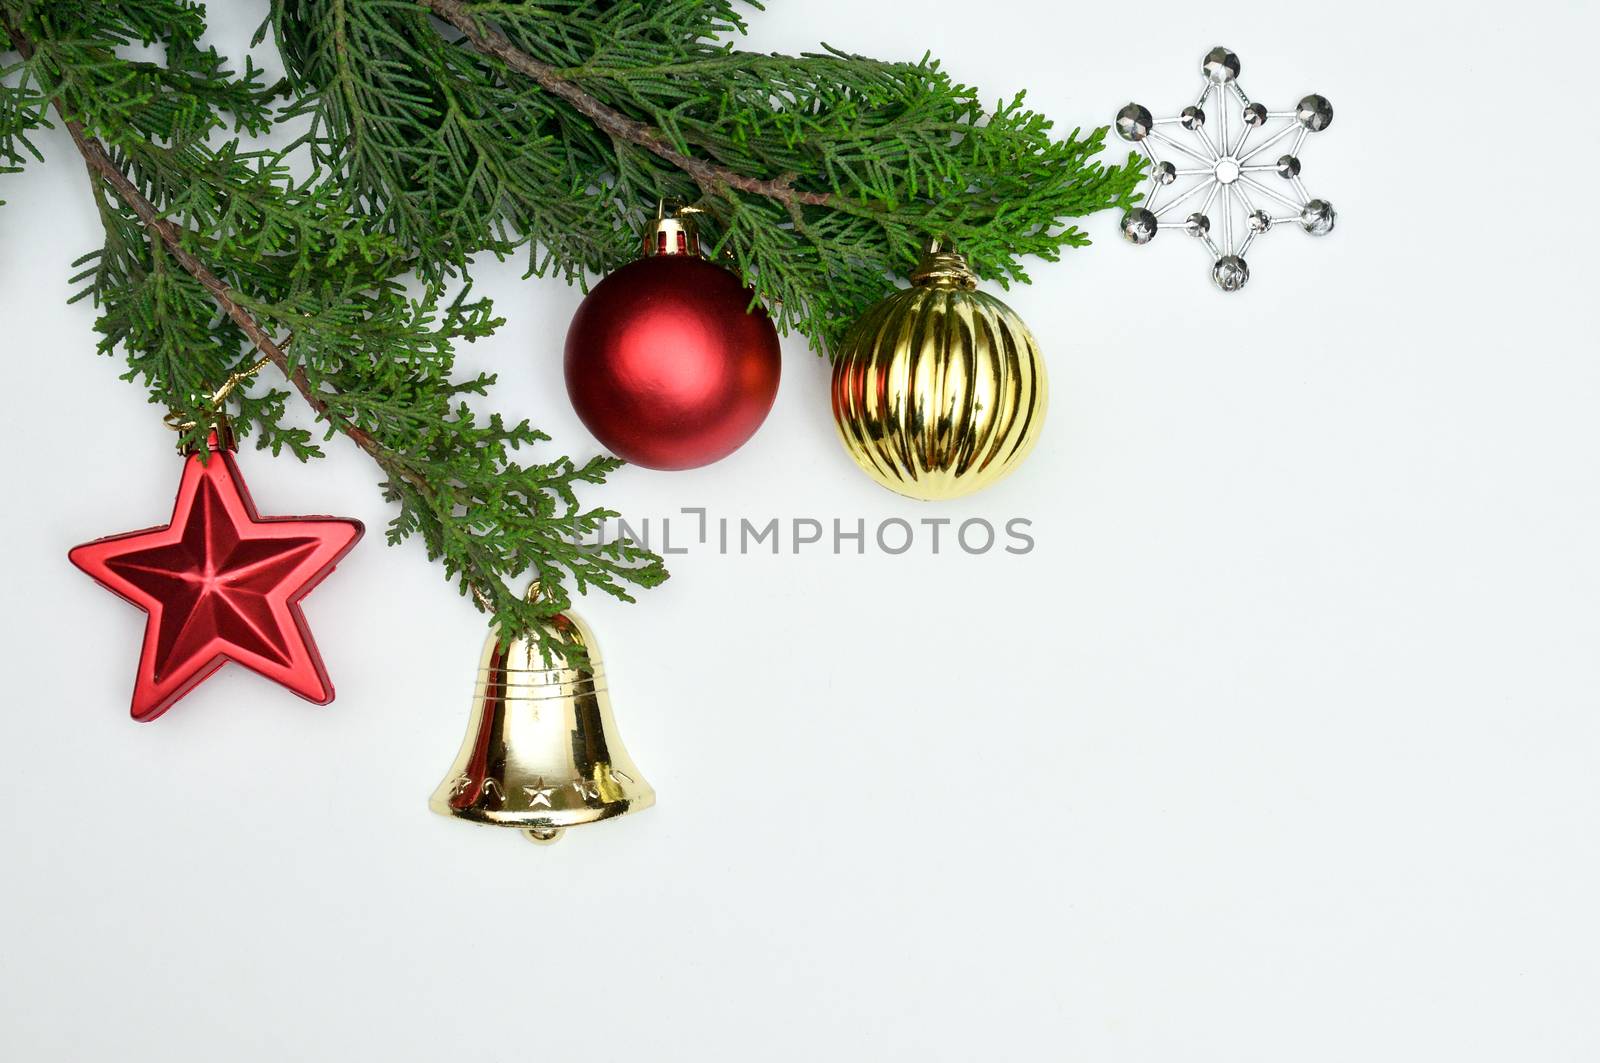 New Year and Christmas backgrounds ror isolation and design by moviephoto